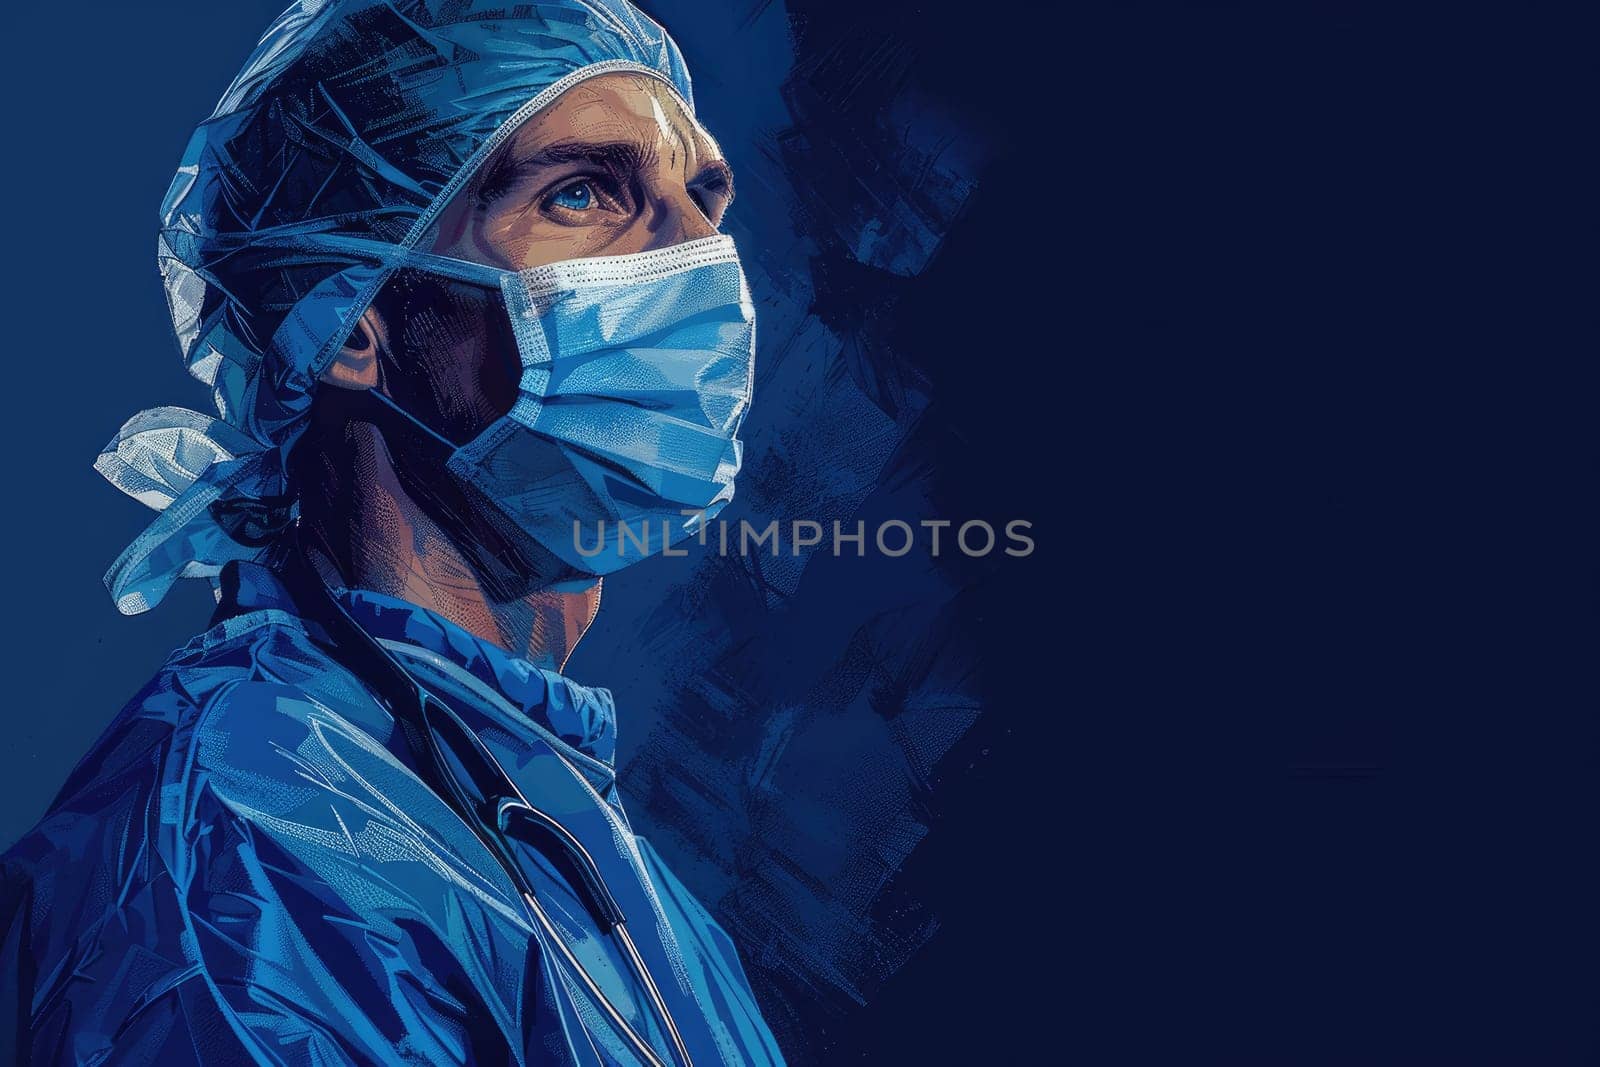 A Surgeon, A medical worker in personal protective gear, Confident medical professional.